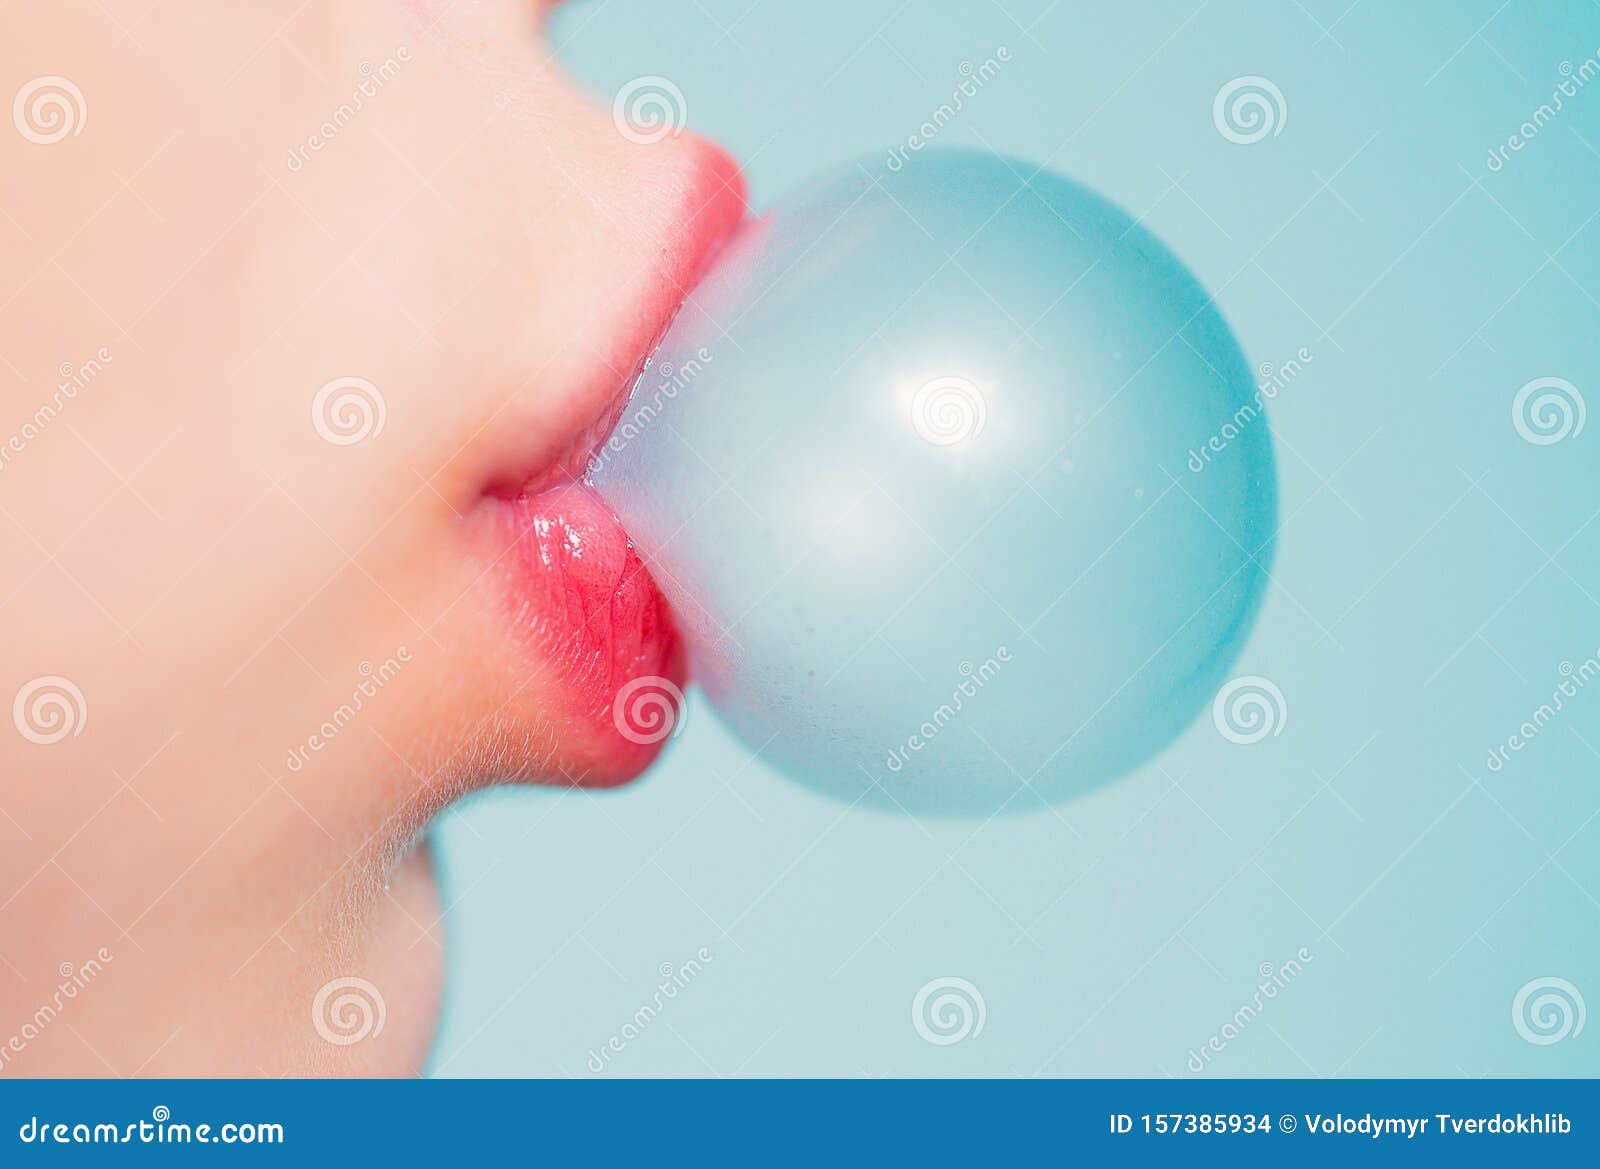 Female Lips Blowing Bubble Gum Close Up Of A Woman Face